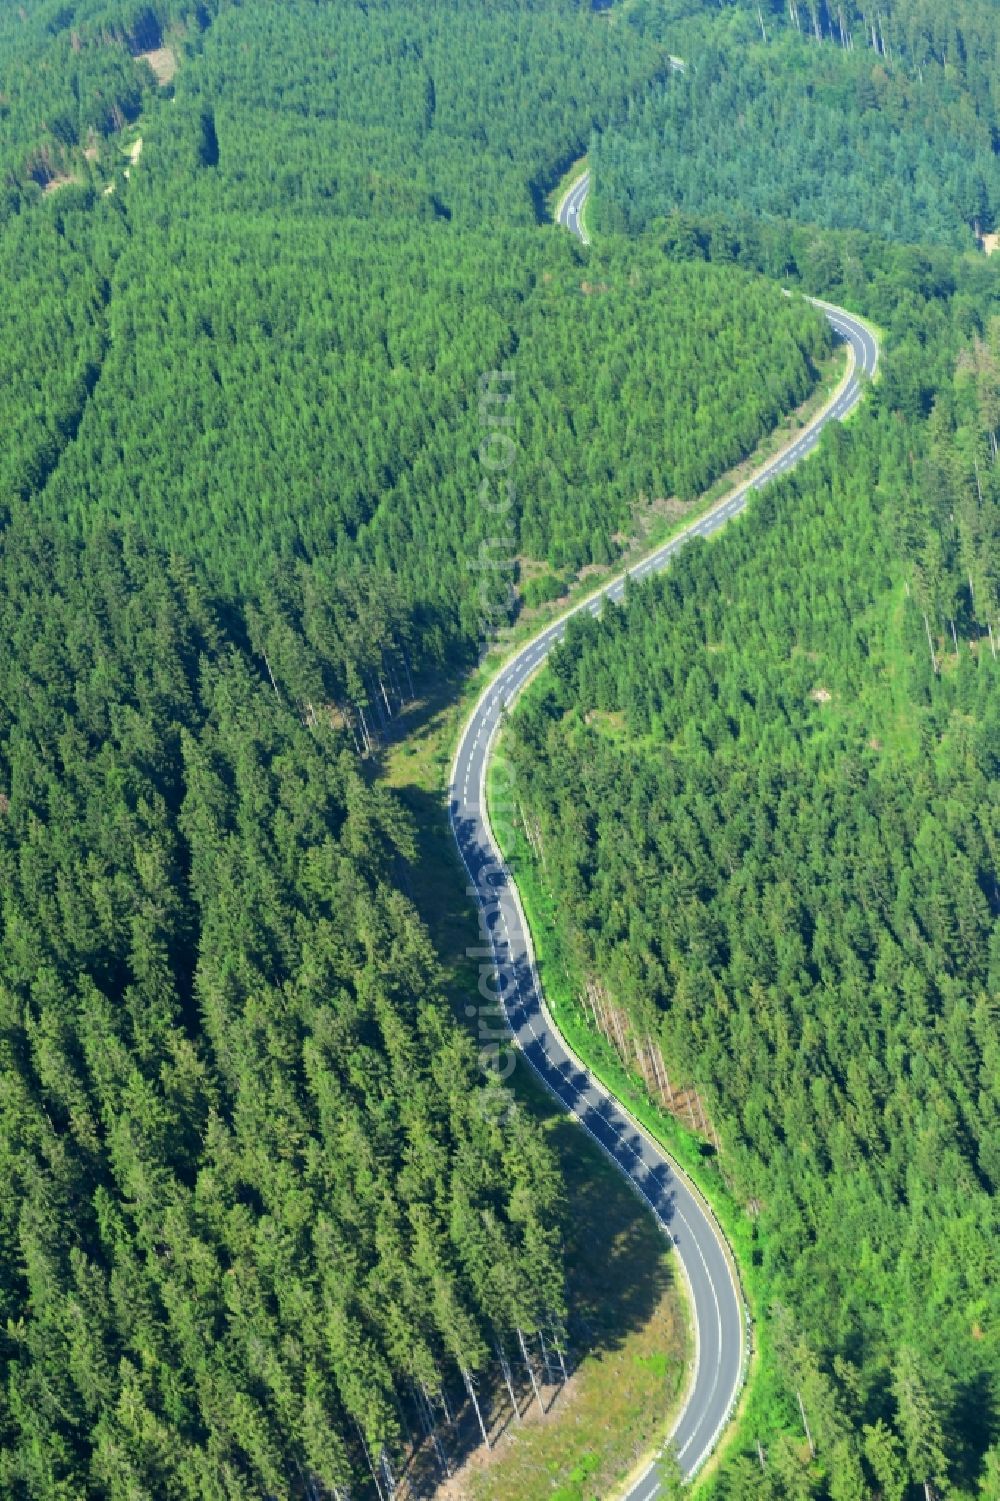 Hahnenklee from above - Serpentine-shaped curve of a road guide Bundesstrasse B 241 in Wald in Hahnenklee in the state Lower Saxony, Germany